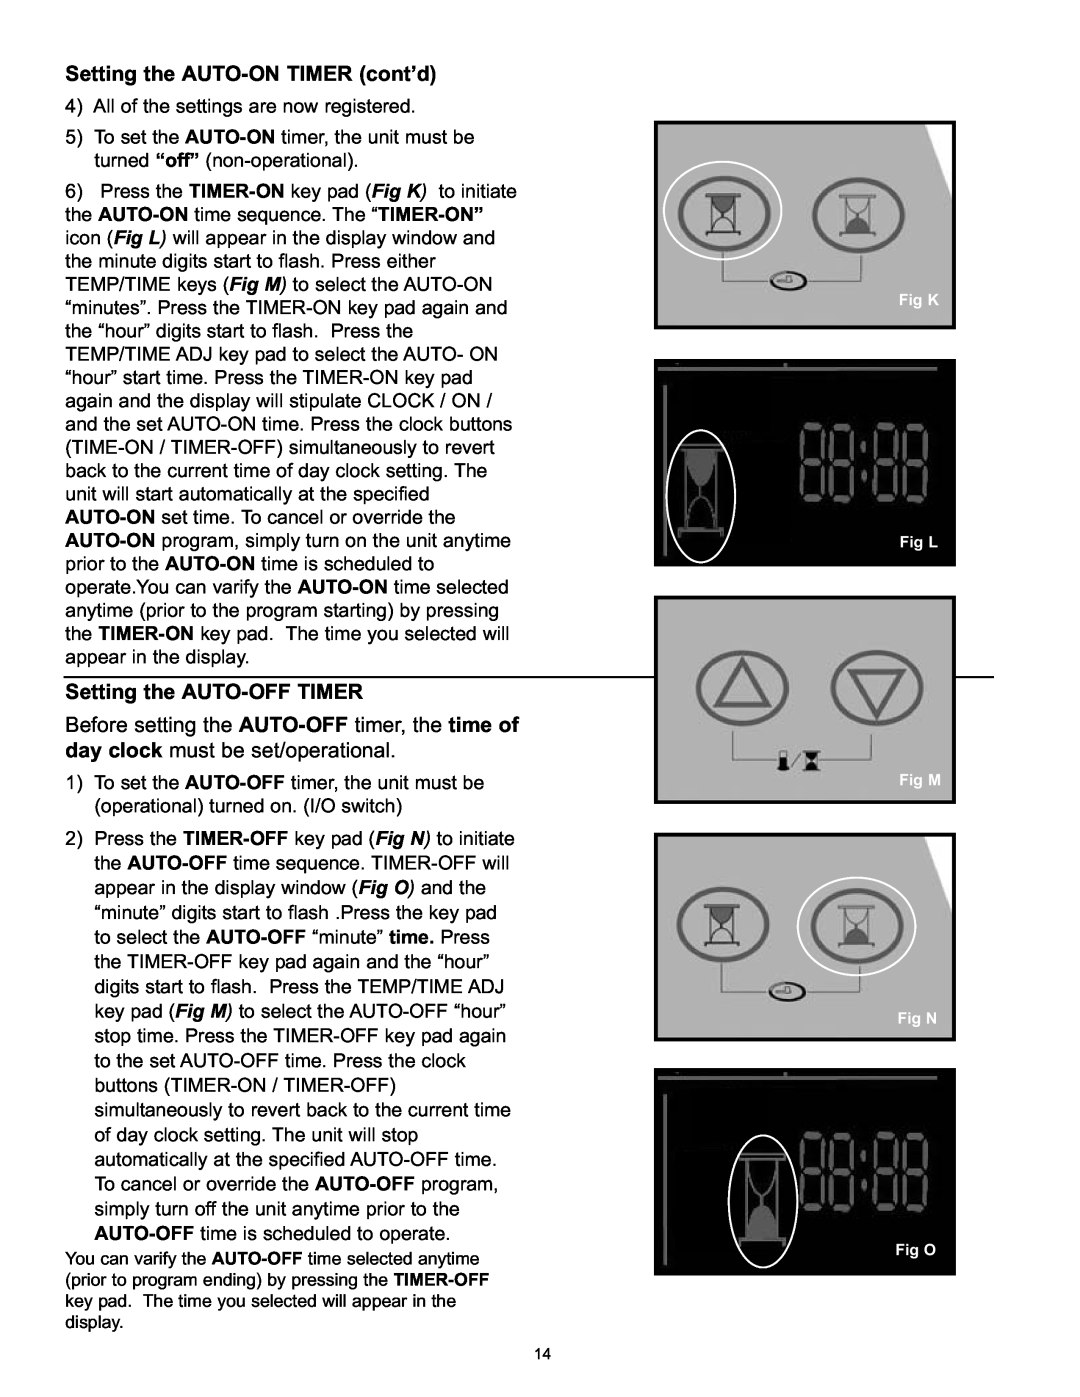 Danby DPAC120061 owner manual Setting the AUTO-ONTIMER cont’d, Setting the AUTO-OFFTIMER 